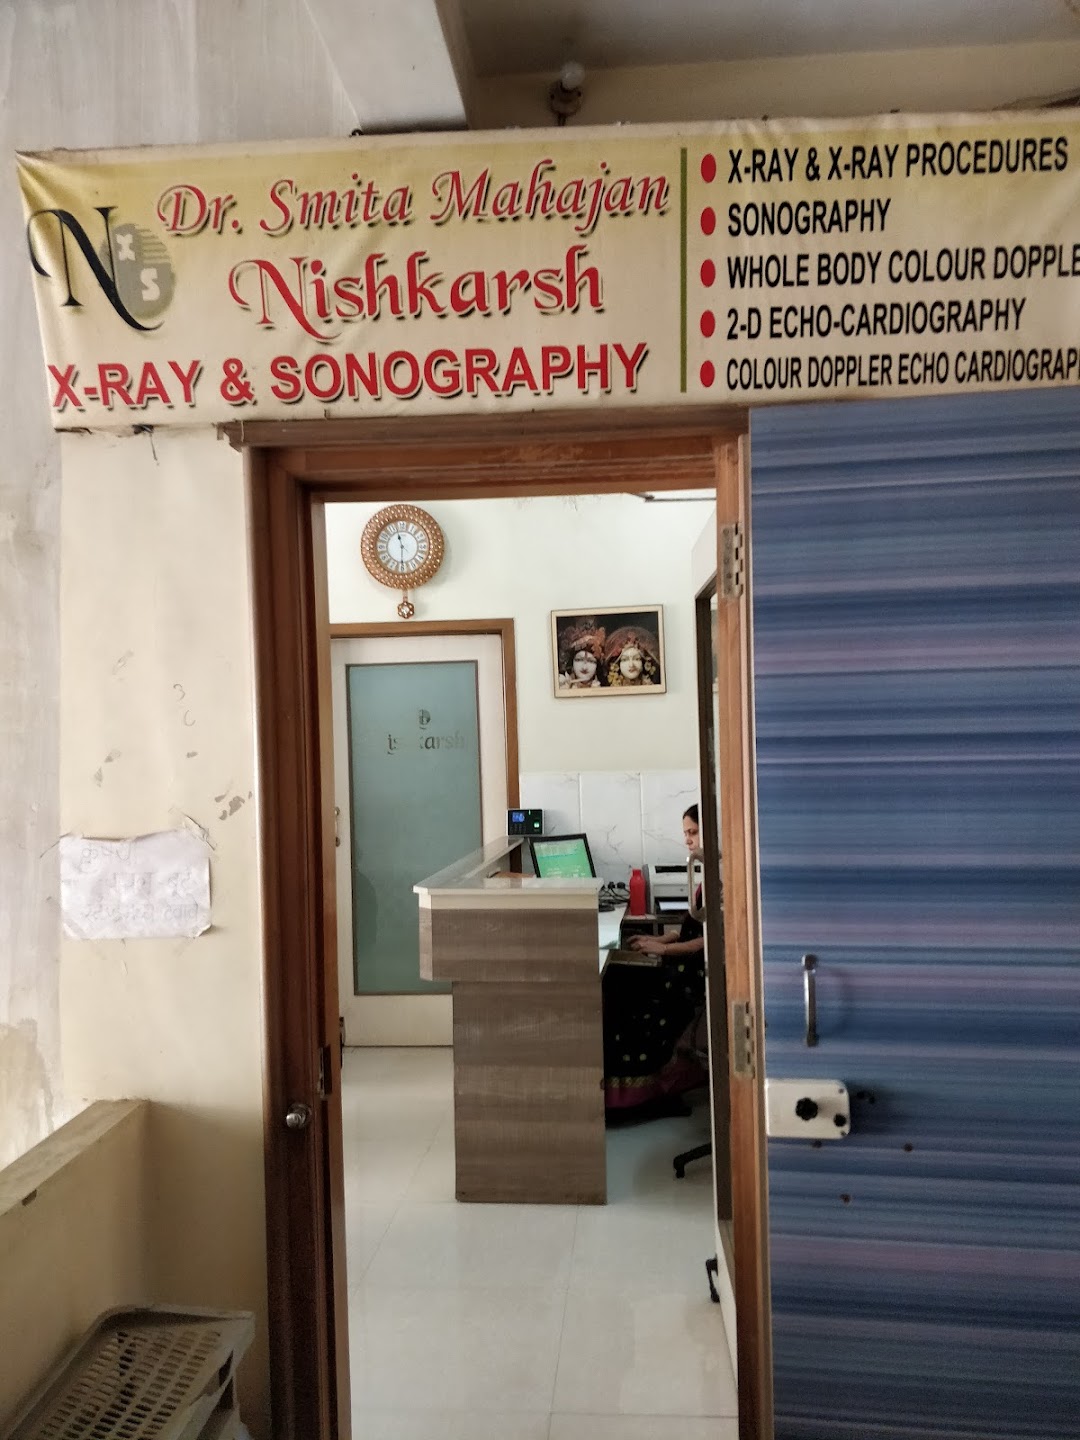 Nishkarsh X-ray and Sonography Centre